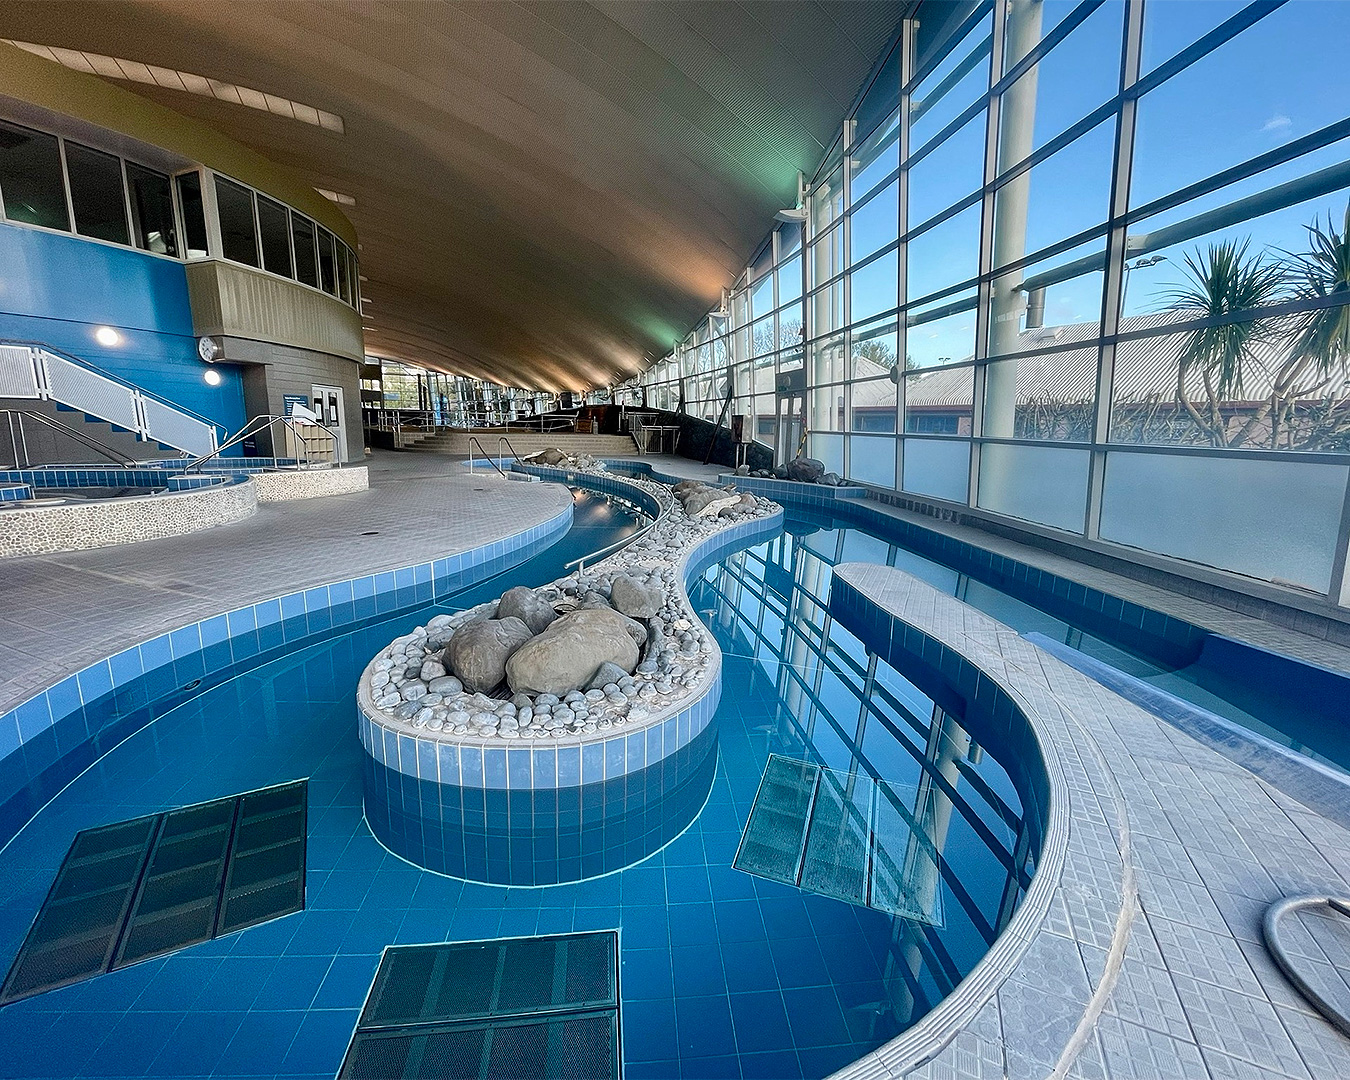 The leisure pools at West Wave Pool And Leisure Centre.